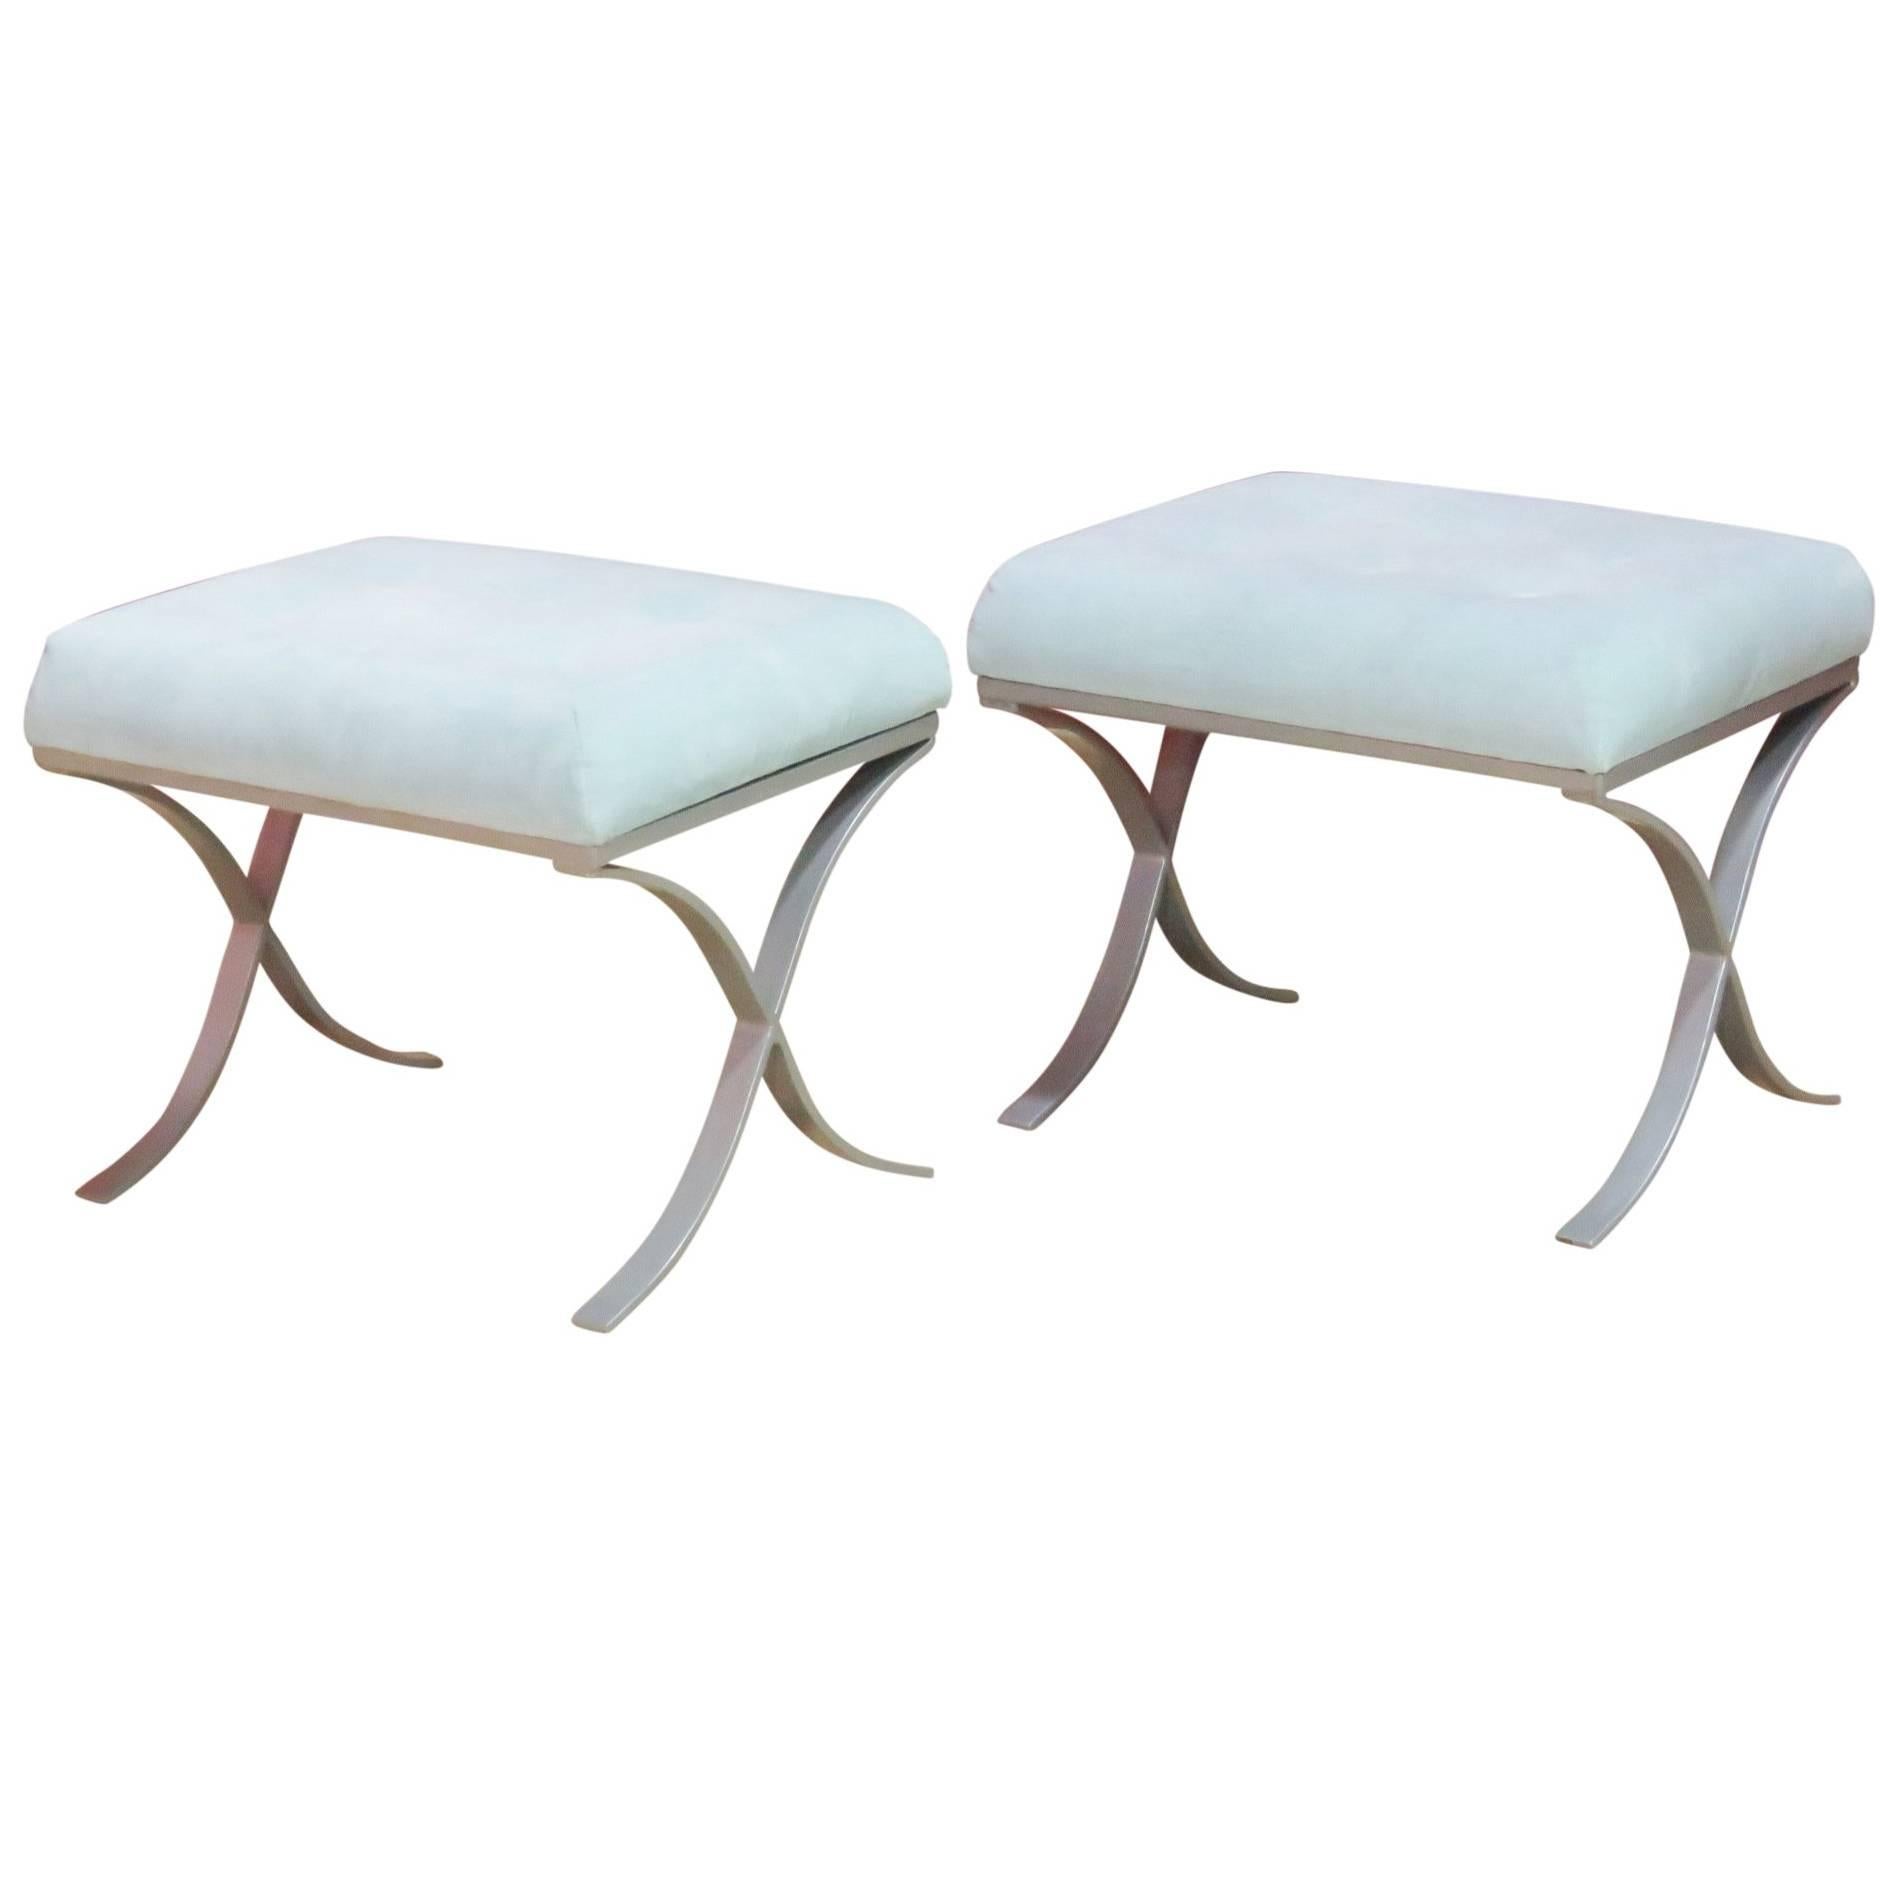 Pair of Modern Design Tufted Upholstered Benches